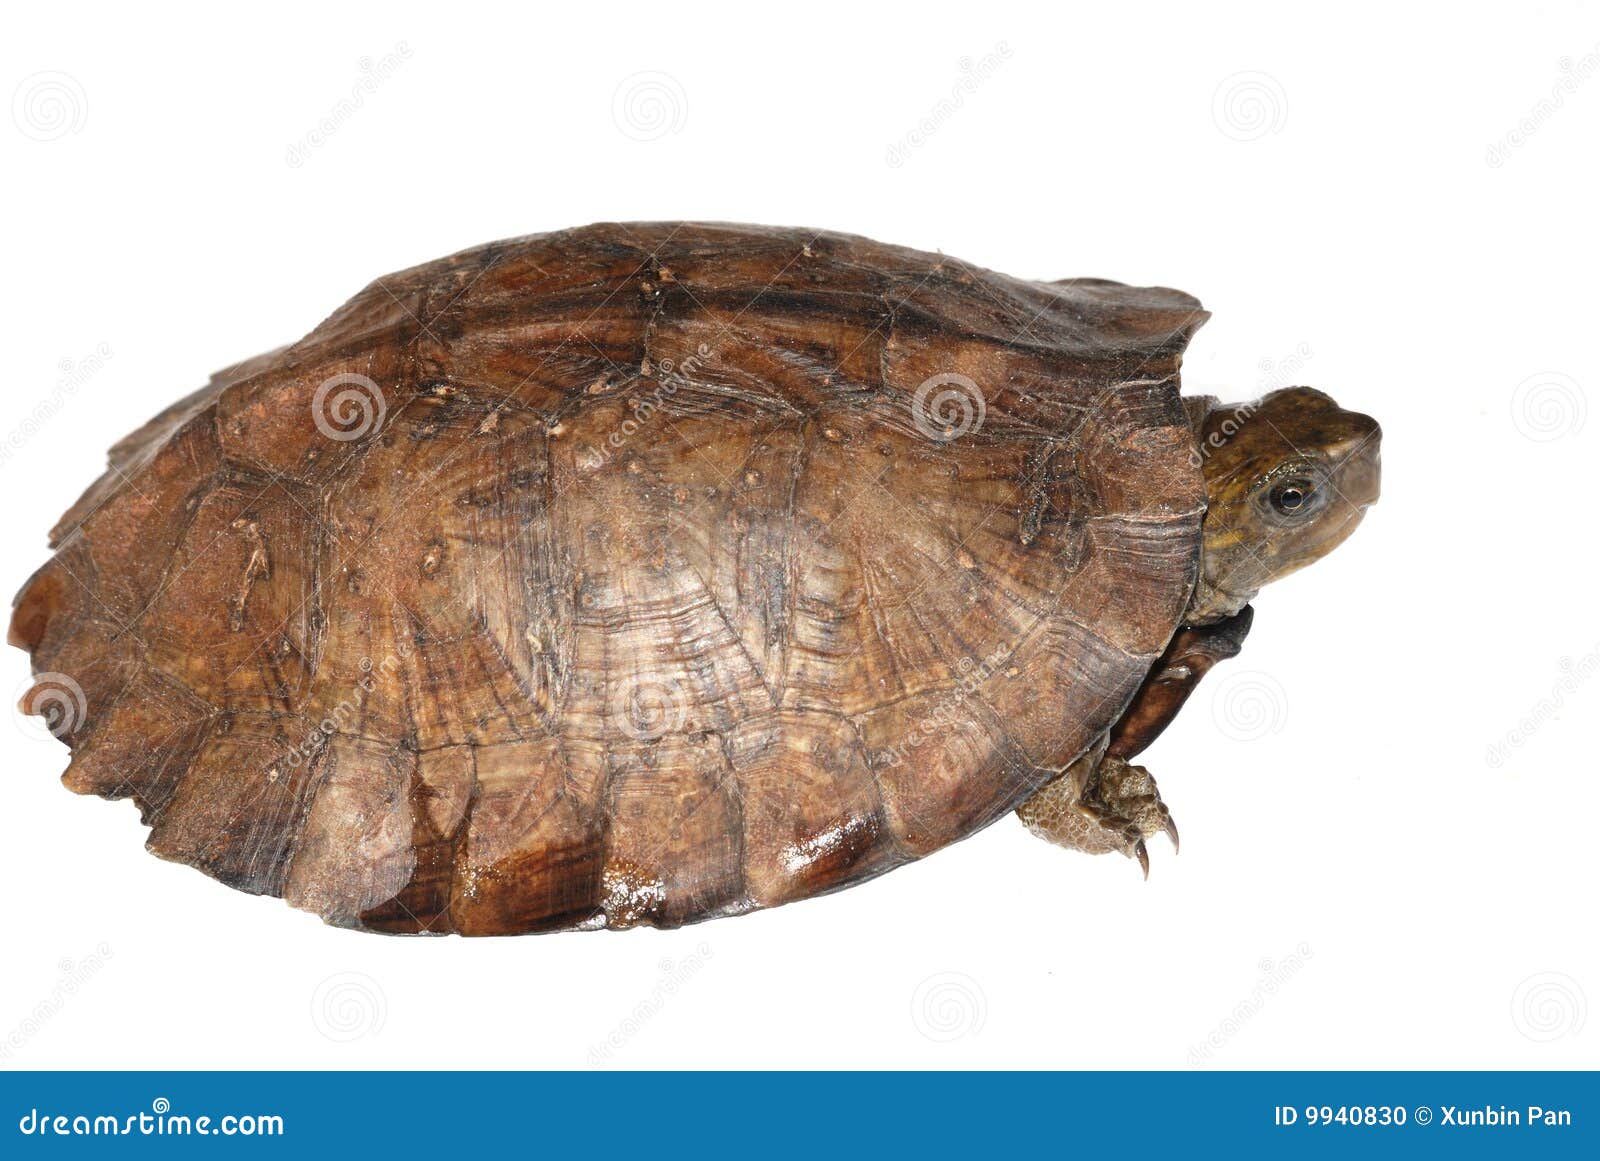 Asian leaf turtle stock photo. Image of desert, remote - 9940830